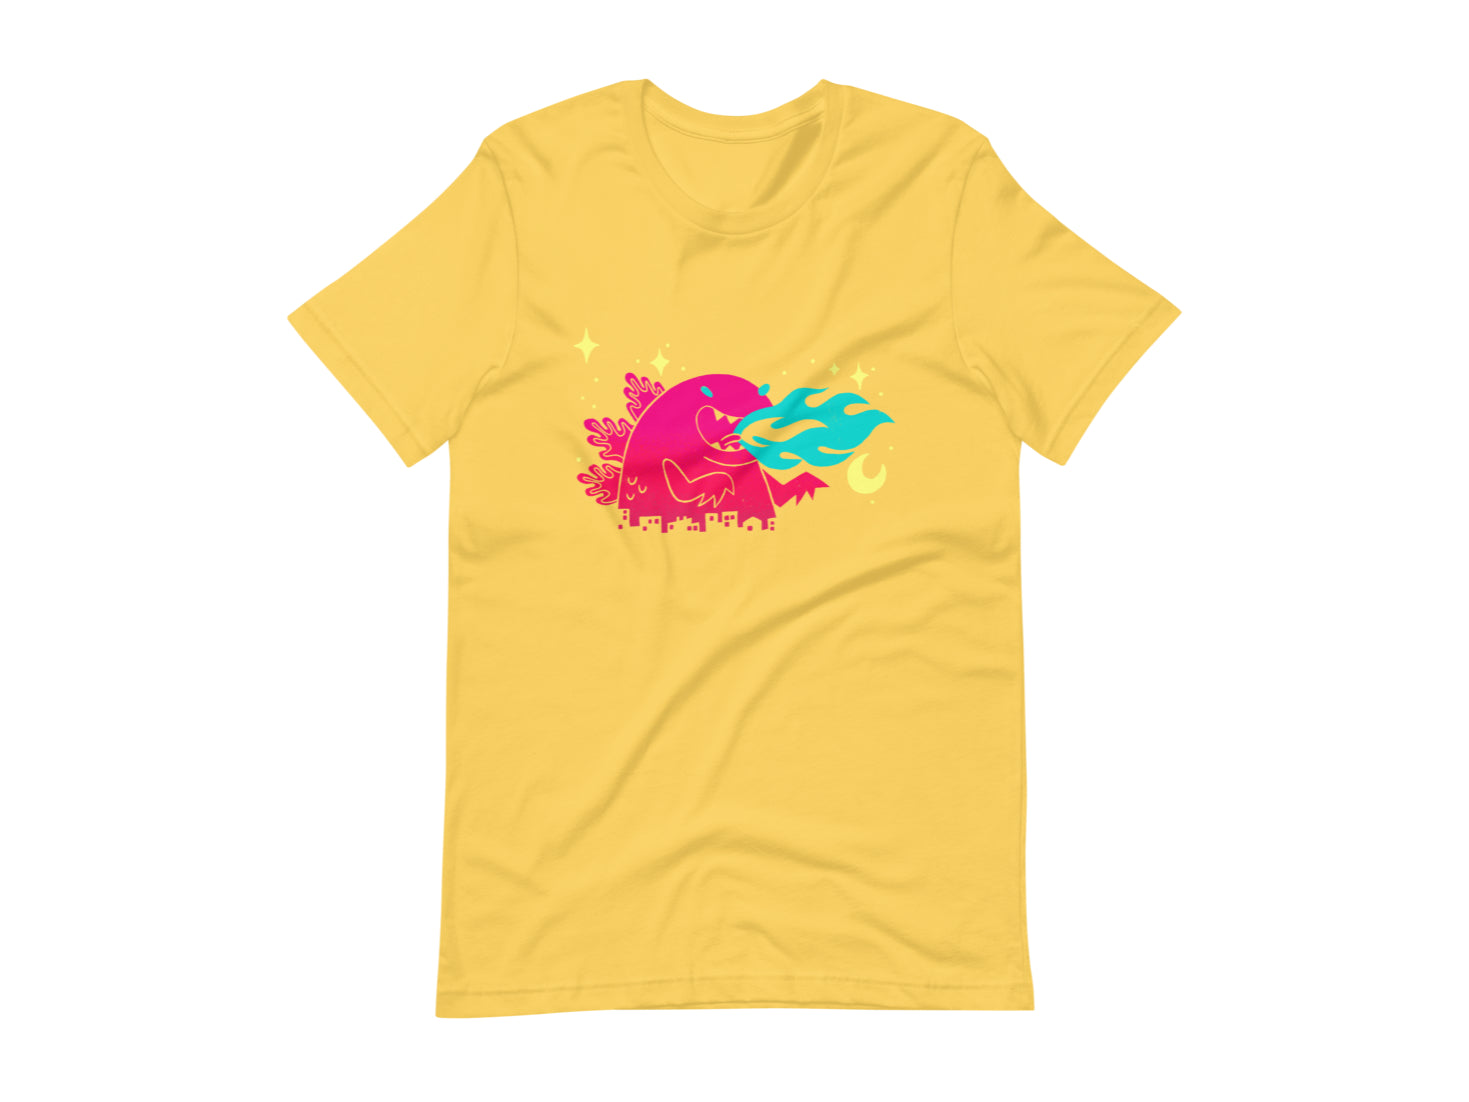 T-shirt with block print style art by Amber Orenstein.  Yellow shirt with a pink godzilla, light yellow stars, and turquoise flames coming from his mouth.